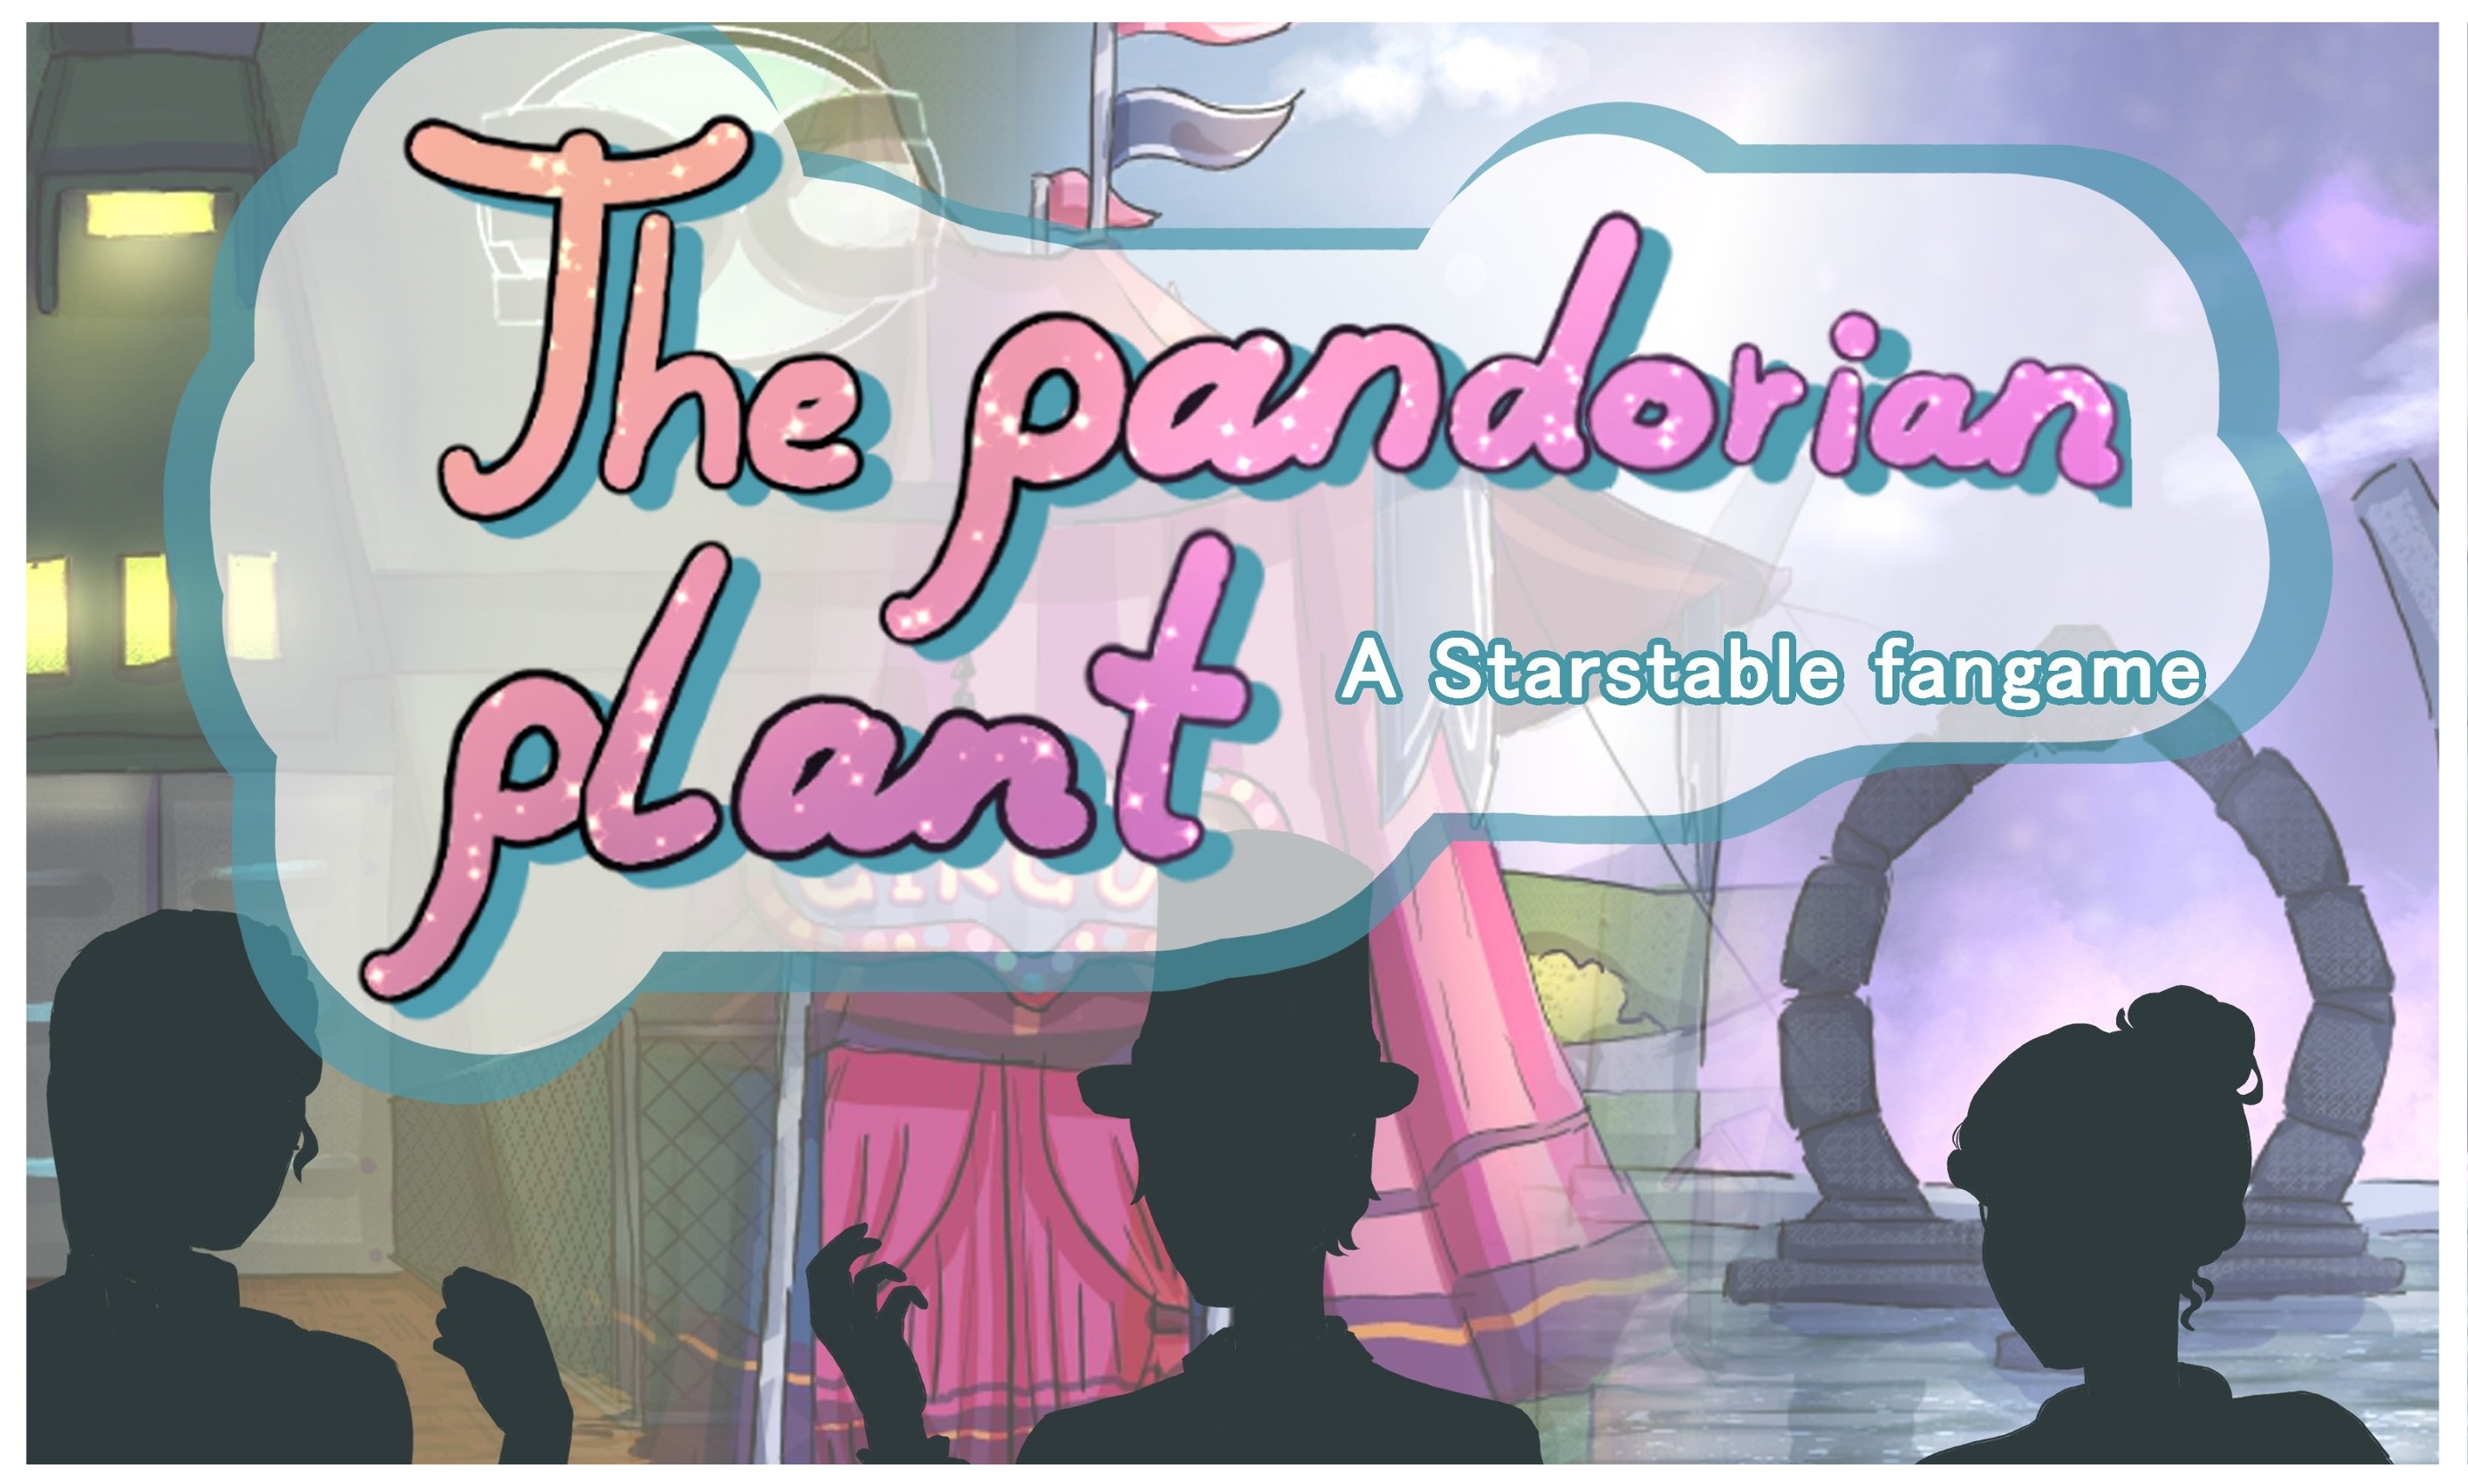 The Pandorian Plant - Starstable Fangame